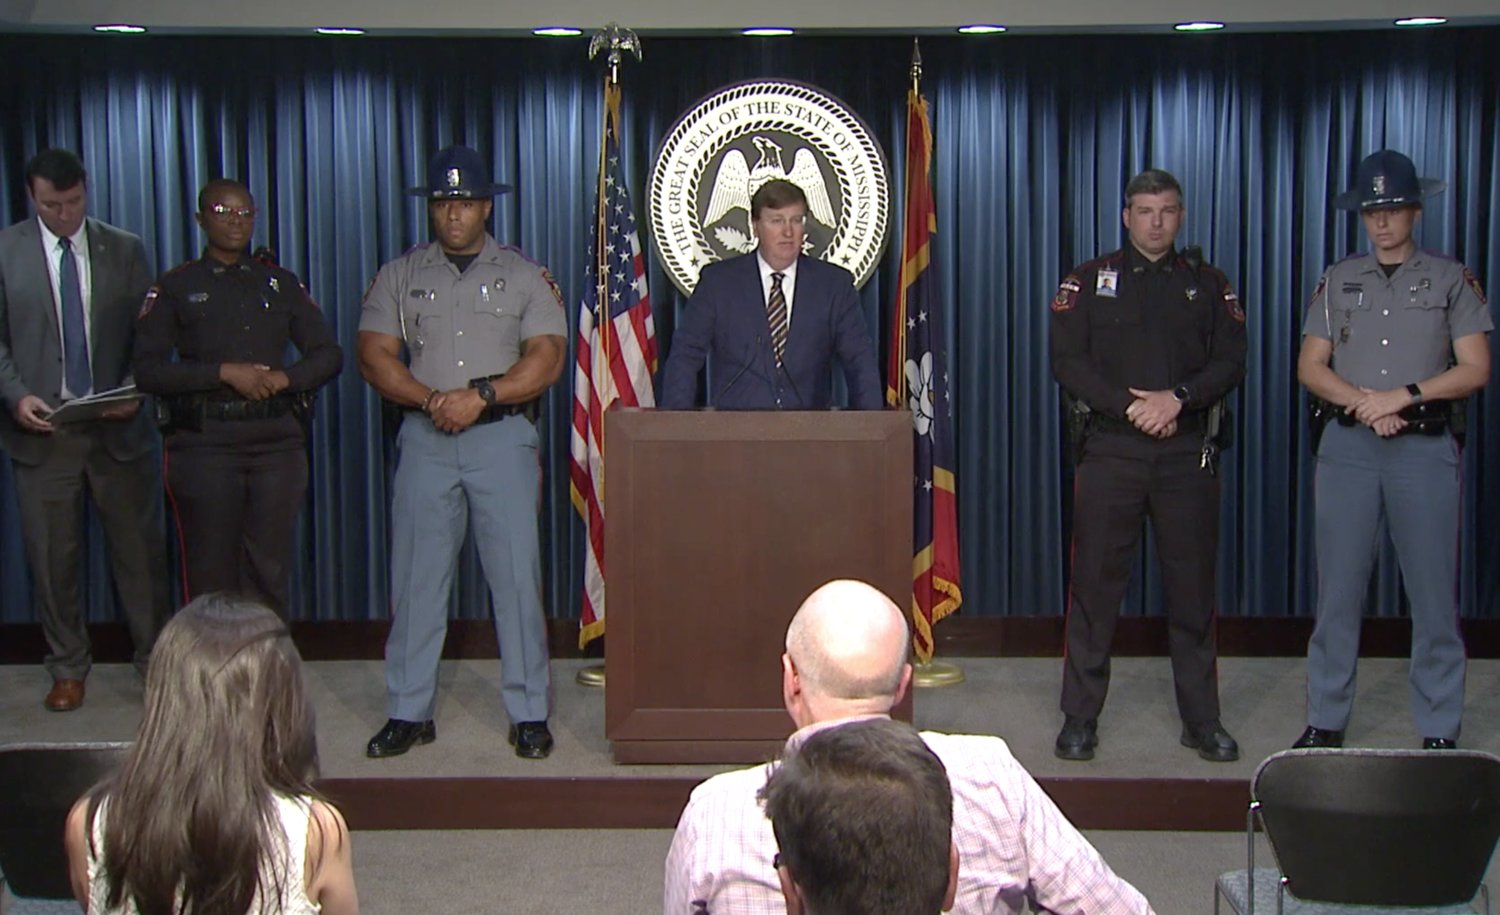 During a Wednesday press conference, Mississippi Gov. Tate Reeves announces a Capital City Initiative aimed at reducing crime in Jackson through legislation allowing state officers to work inside the Jackson city limits.